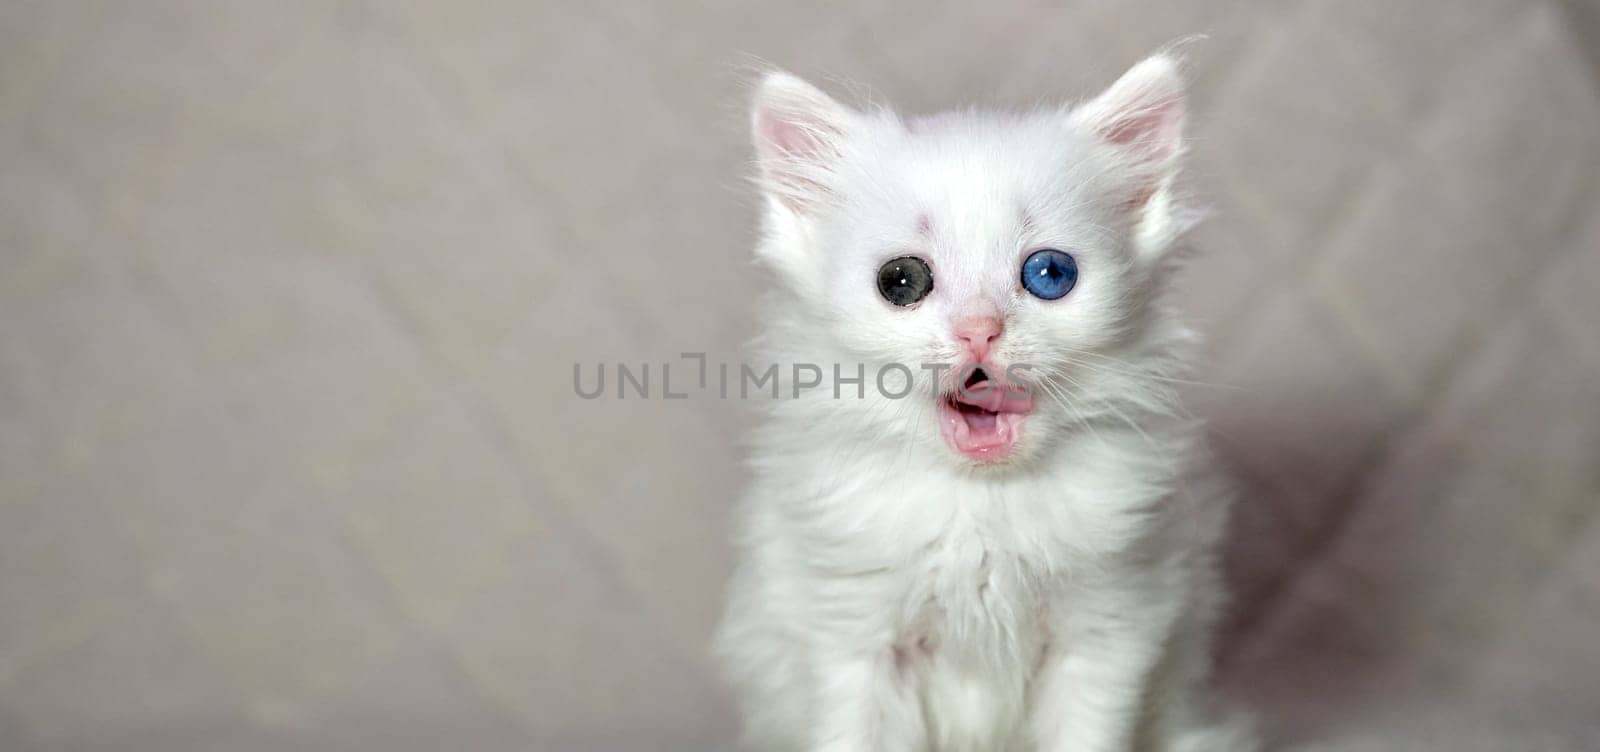 kitten with heterochromia white color by lempro